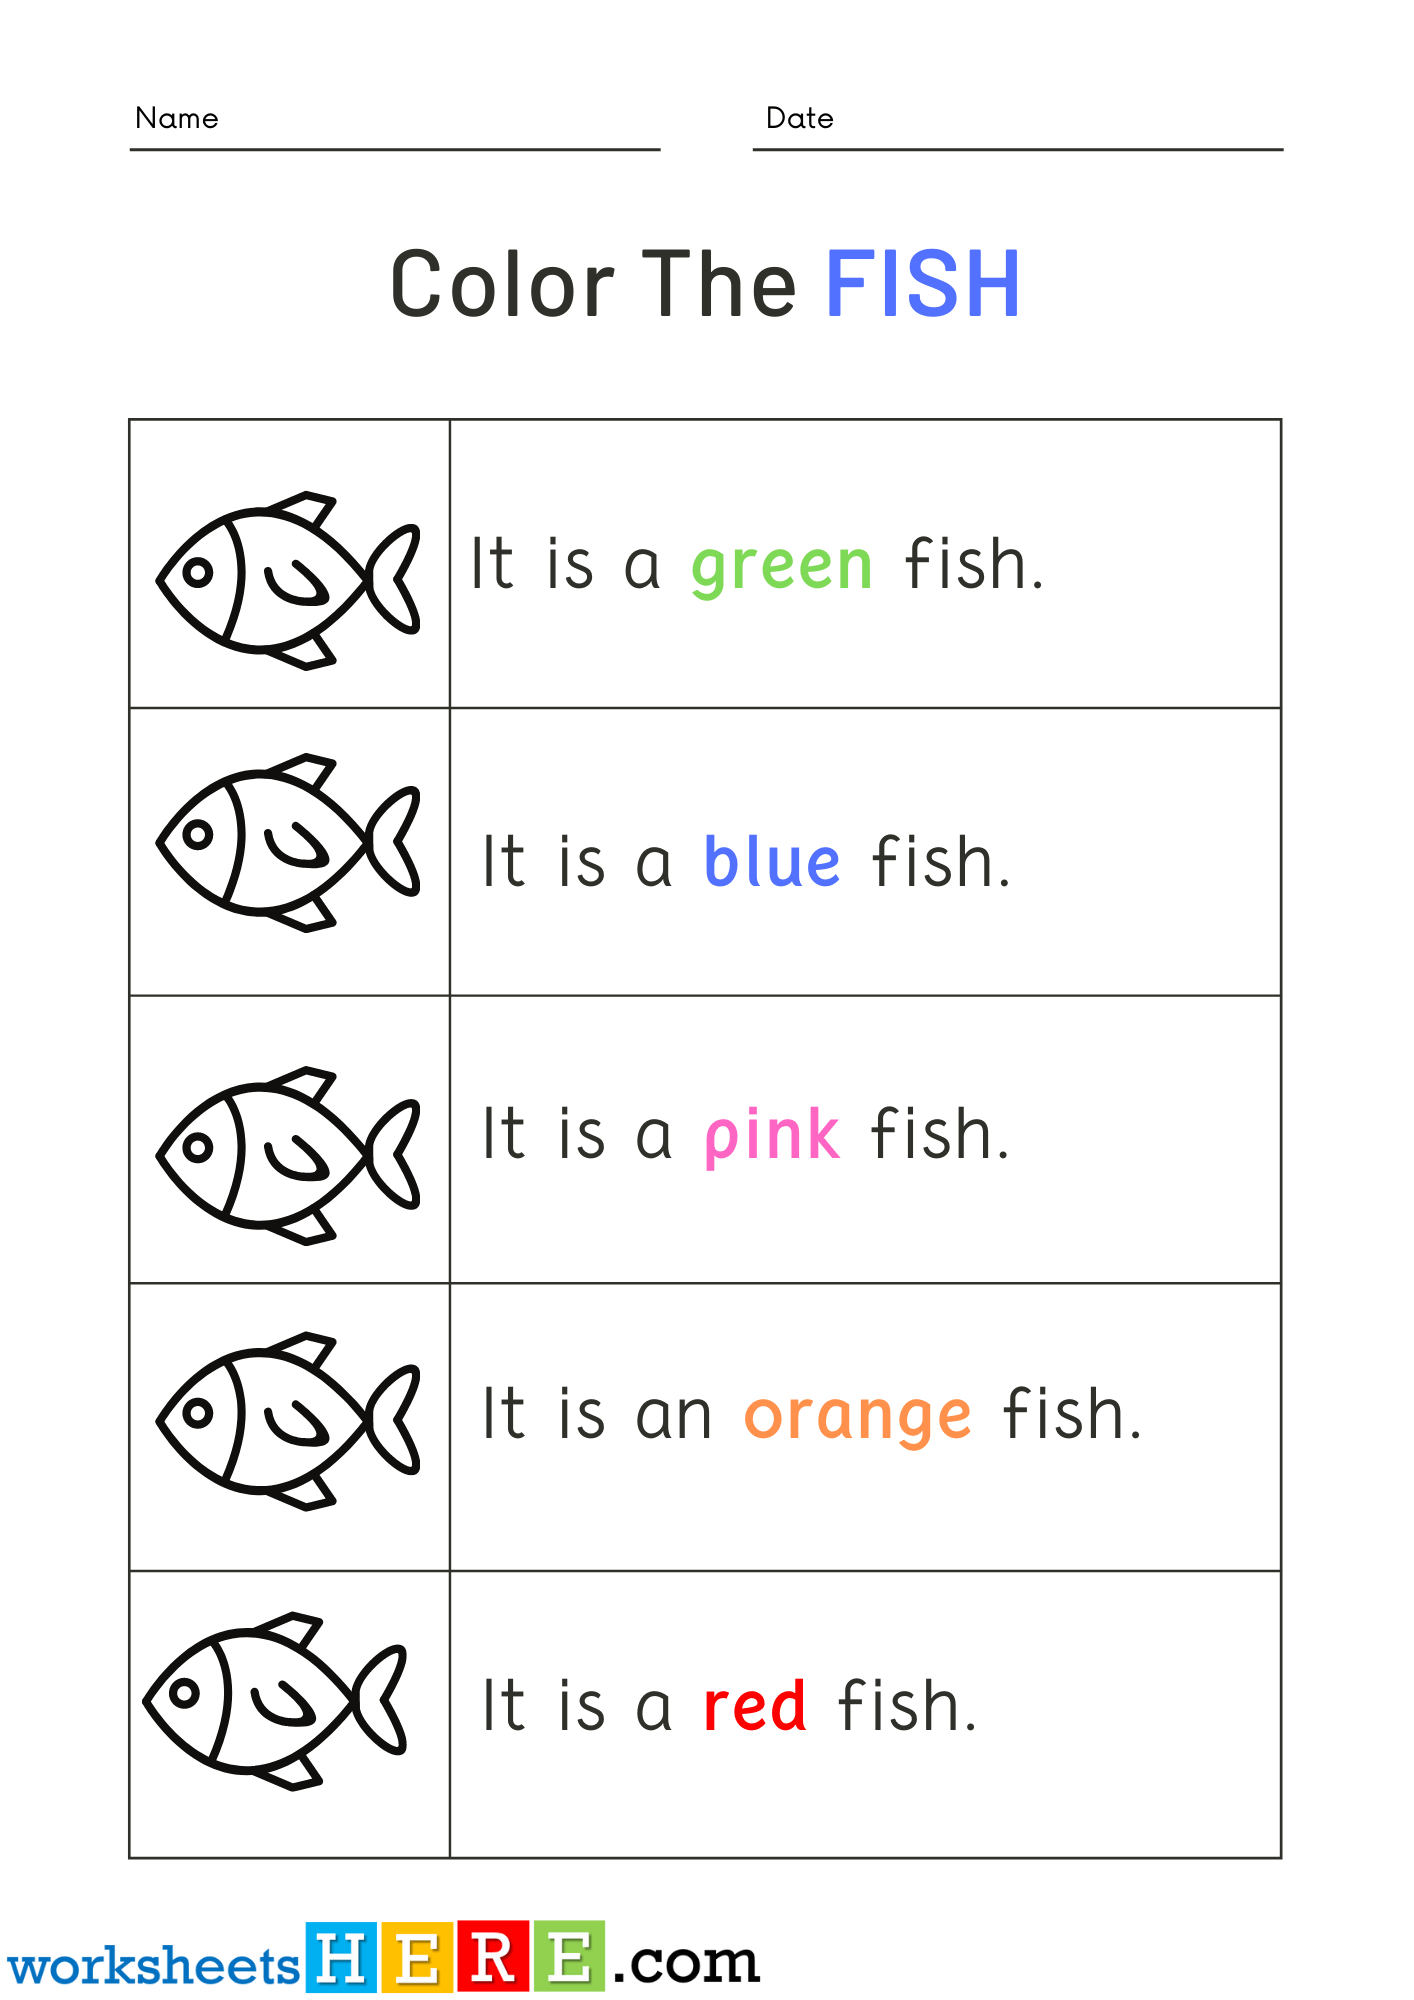 Read Words and Color Fish Pictures Activity PDF Worksheets For Kindergarten